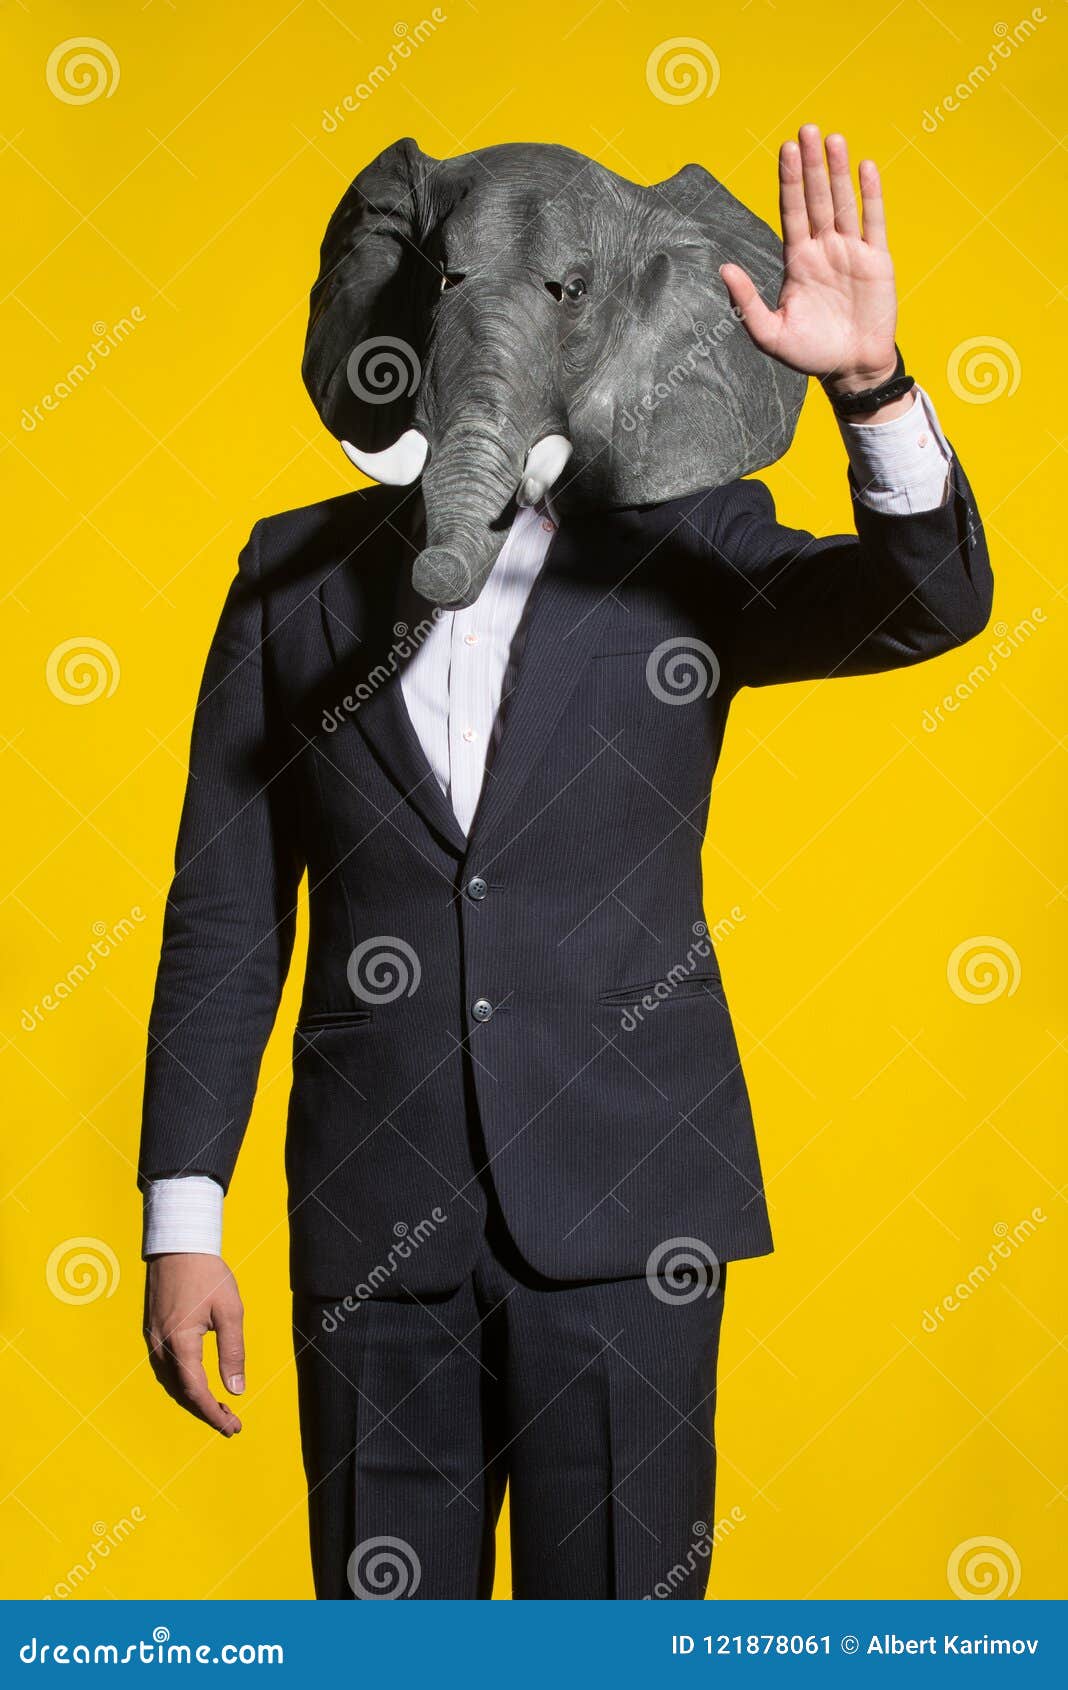 Download Man With An Elephant Mask On A Yellow Background Stock Image Image Of Experience Poster 121878061 PSD Mockup Templates